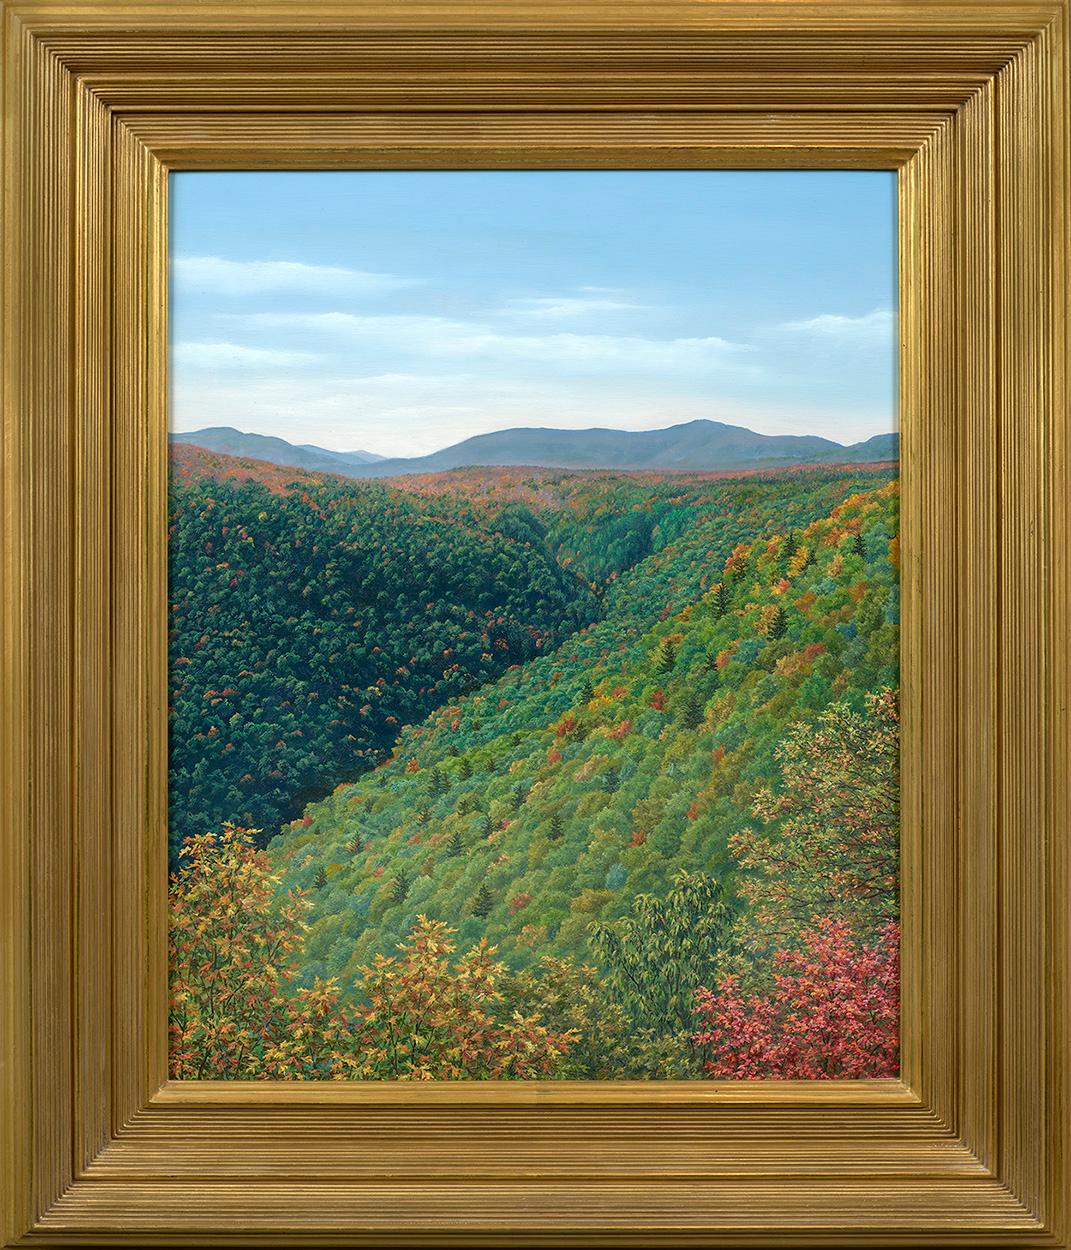 Kaaterskill Clove - Painting by Tom Yost